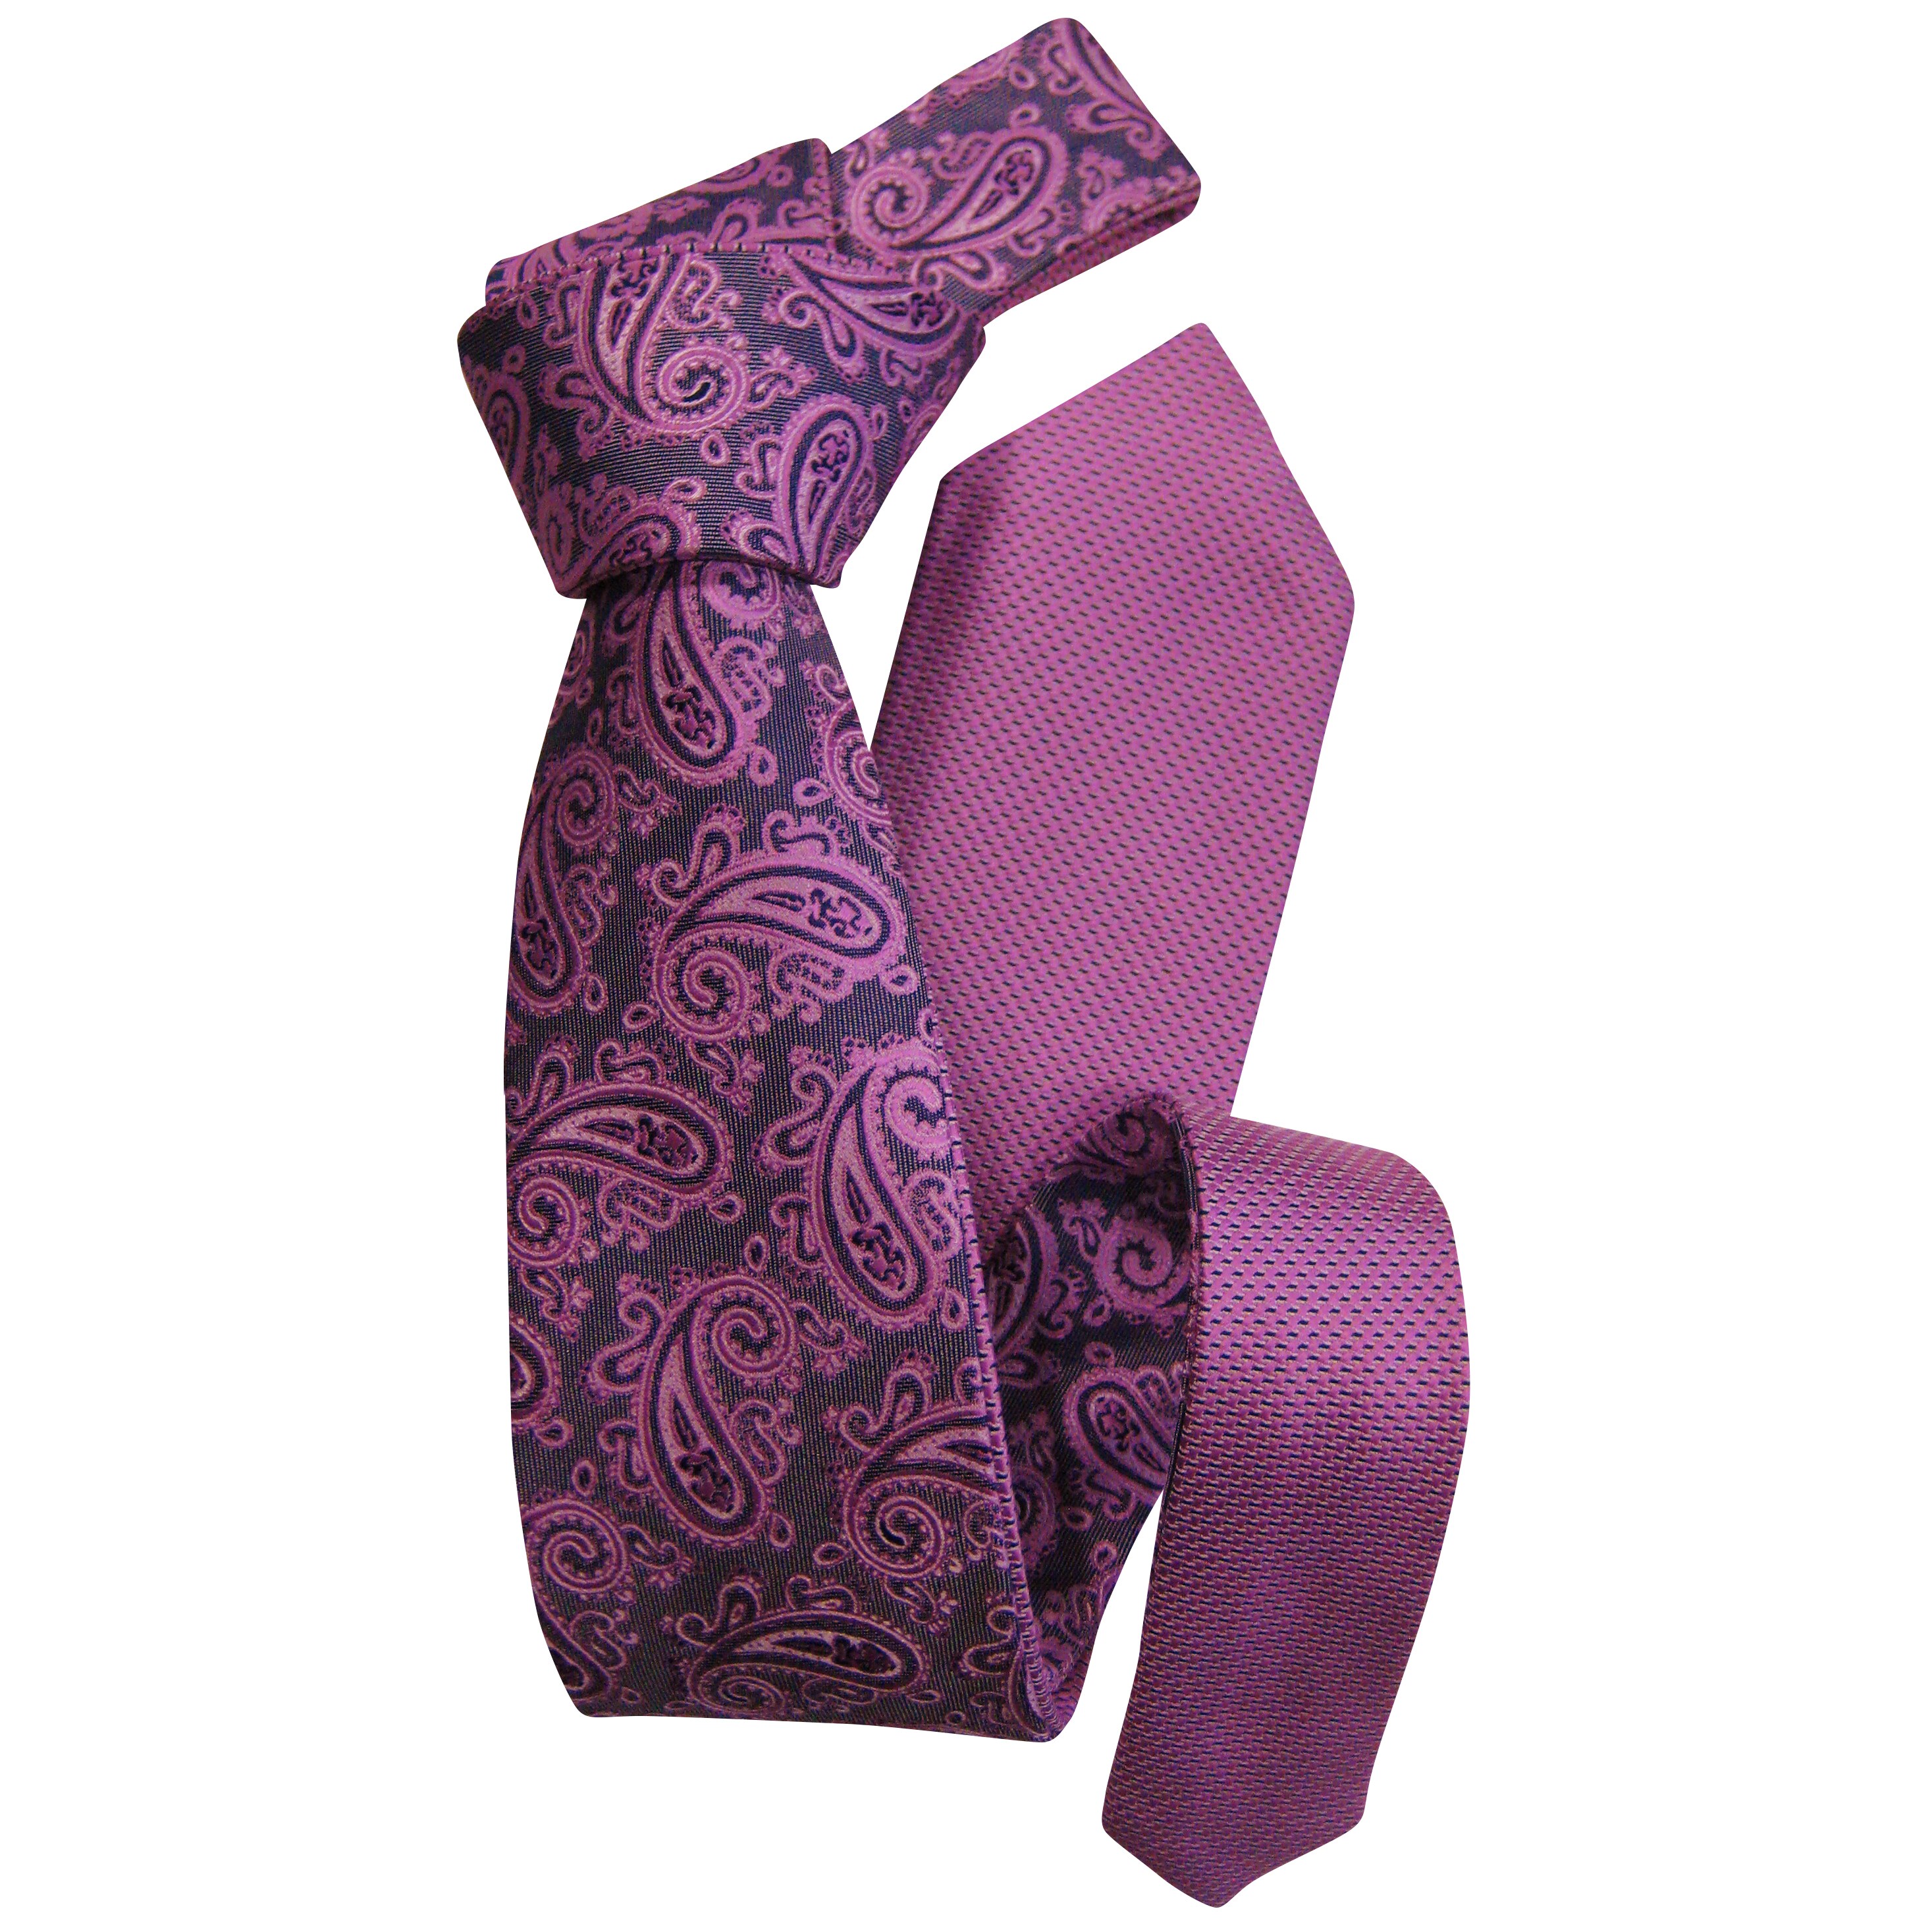 Dmitry Mens Pink Double sided Paisley/solid Patterned Italian Silk Tie (PinkCountry of origin ItalyApproximate length 59 inchesApproximate width 2.75 inchesMaterials 100 percent silkCare instructions Dry cleanAll measurements are approximate.  )